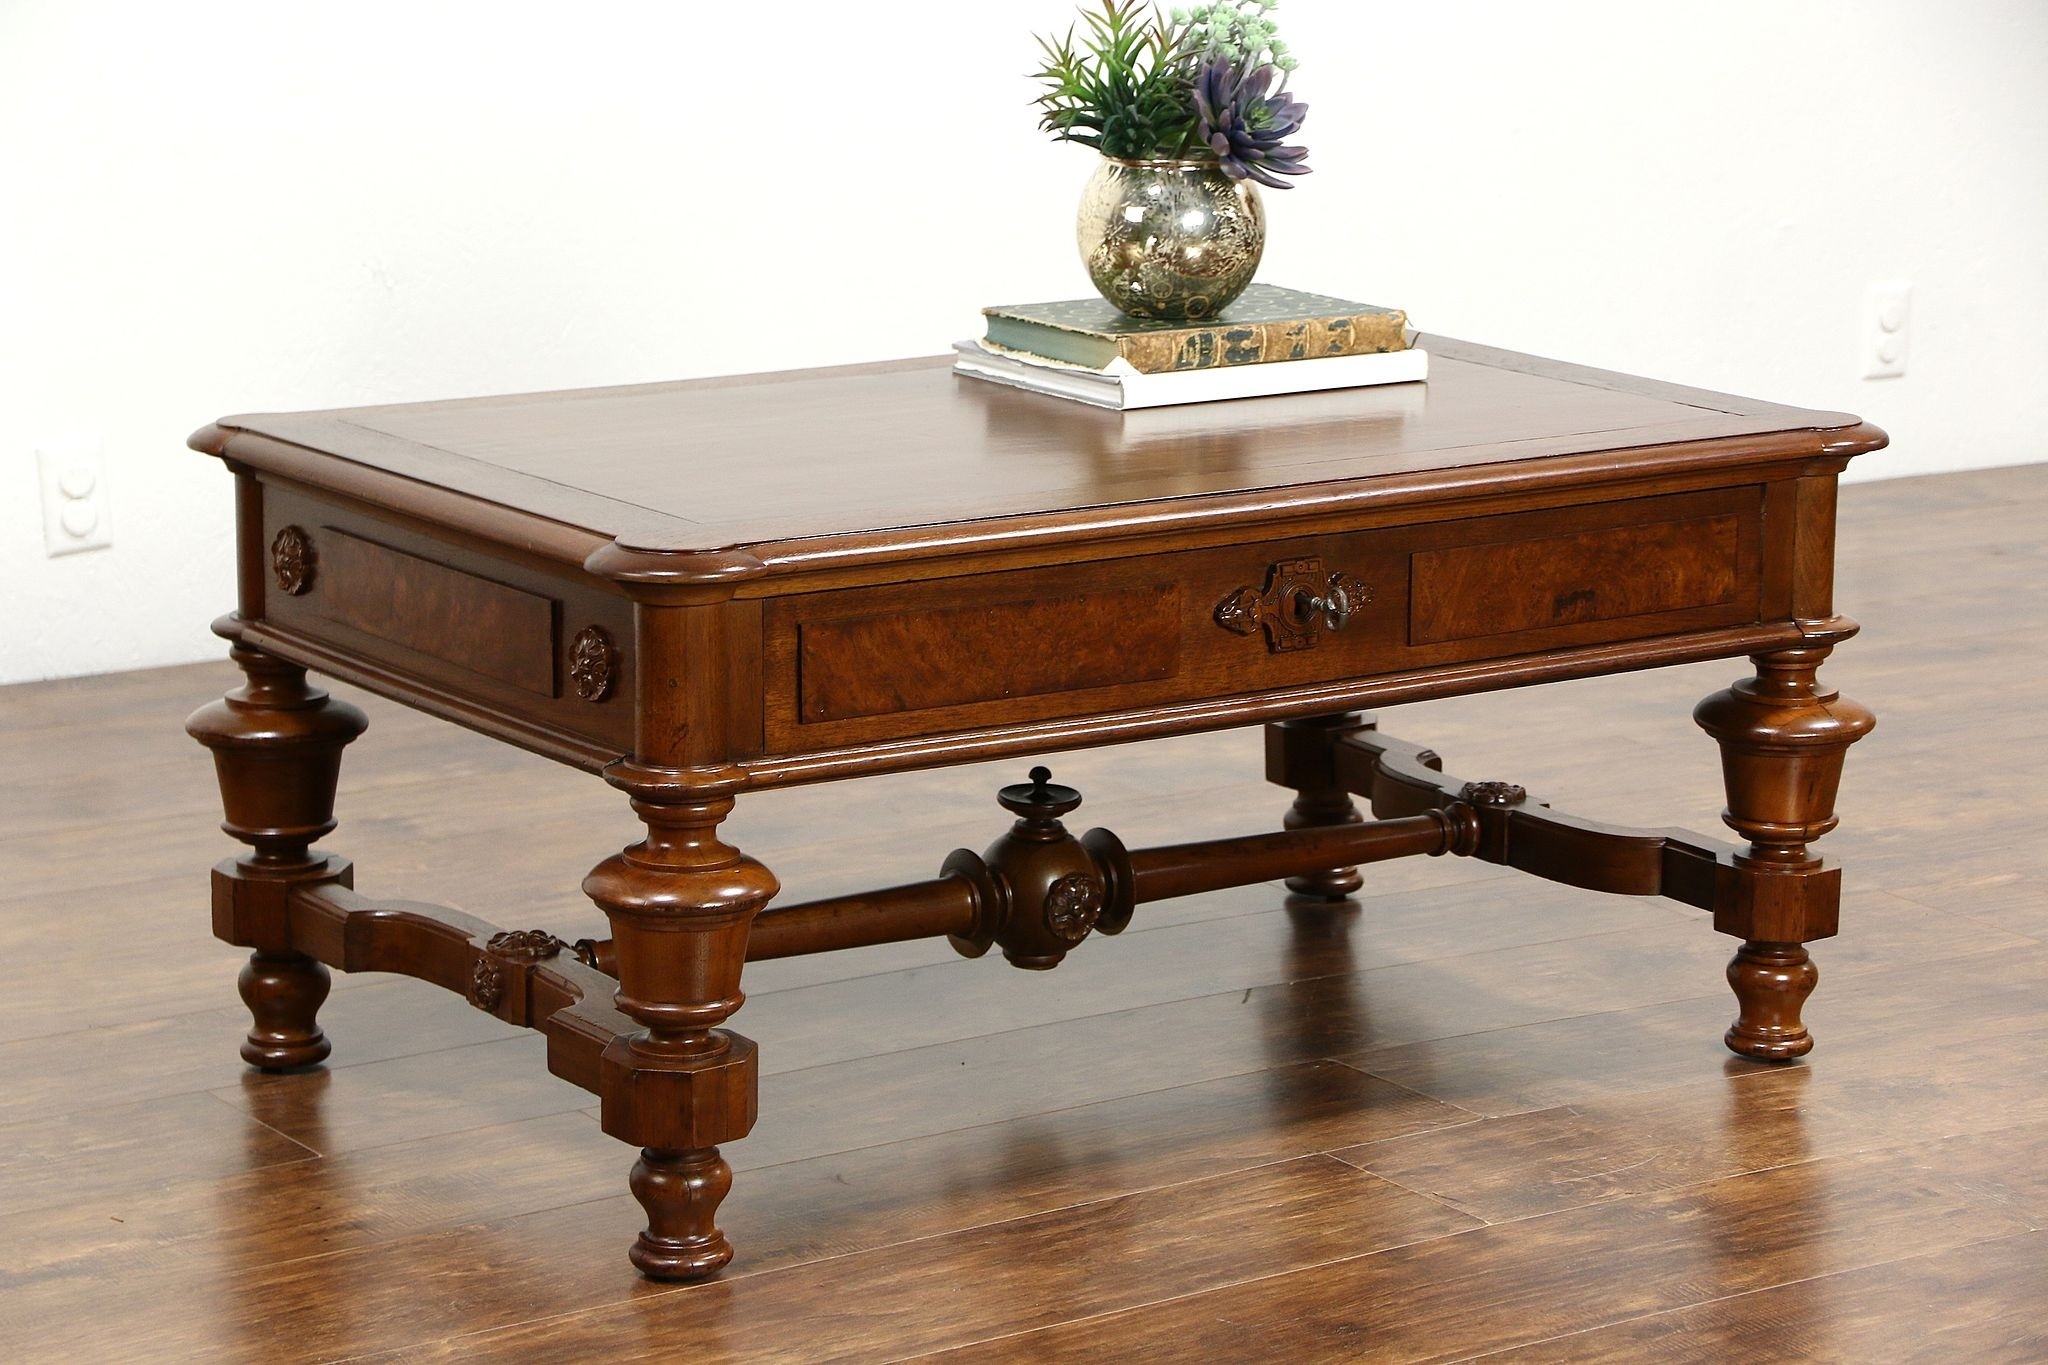 Sold coffee table from shortened 1870 antique victorian